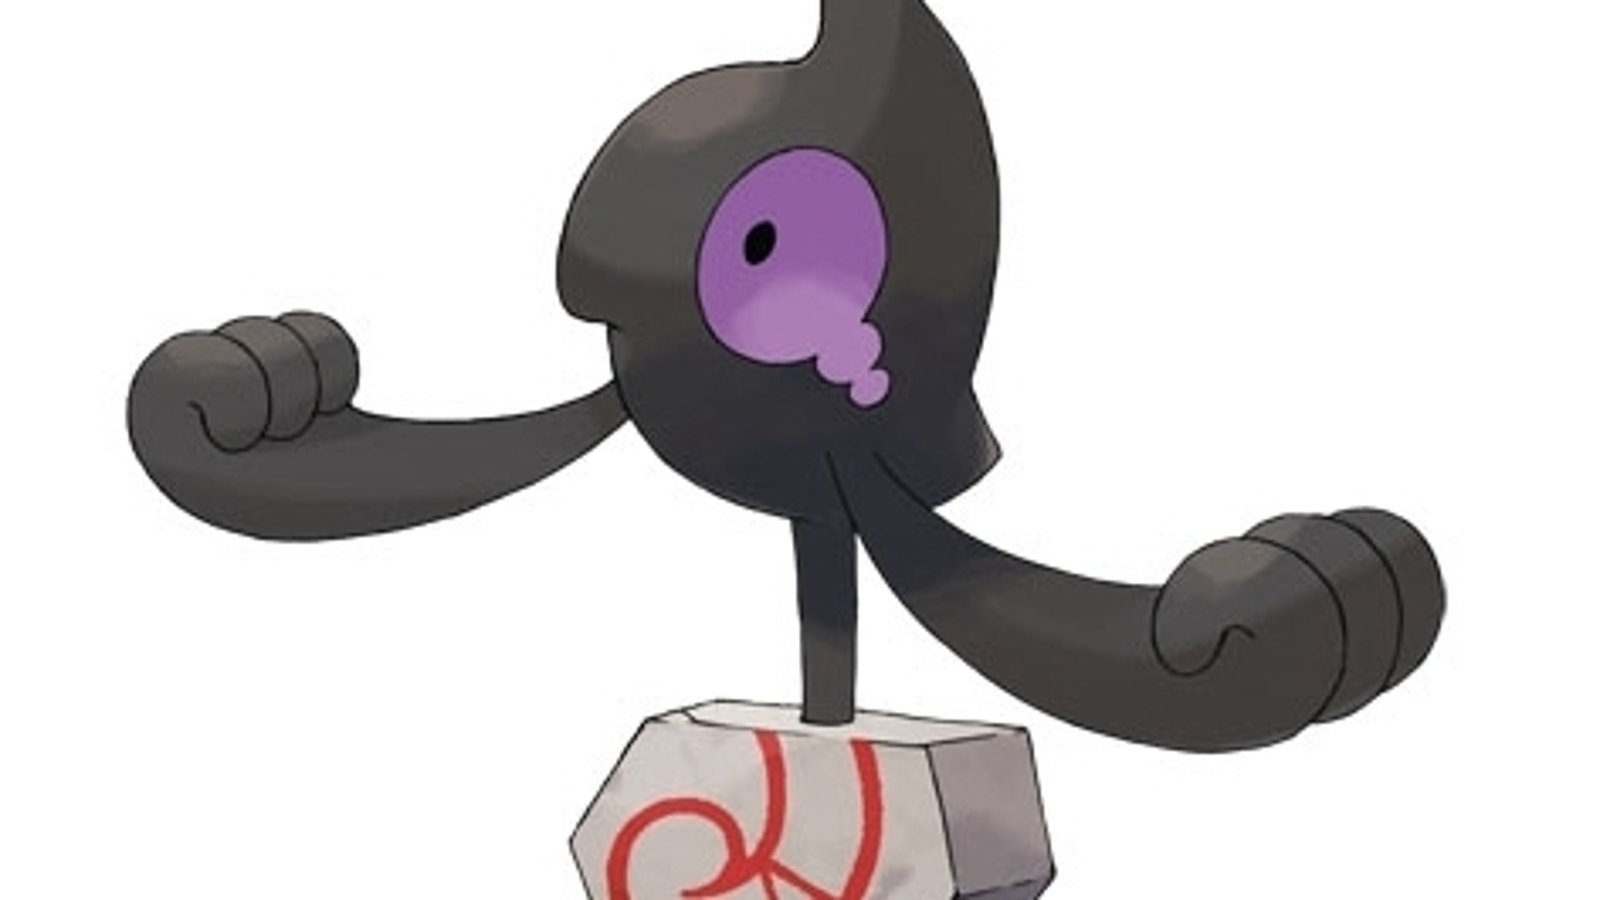 Pokémon Go' Research Task Update: Halloween Event Brings New Encounters  Including Spiritomb